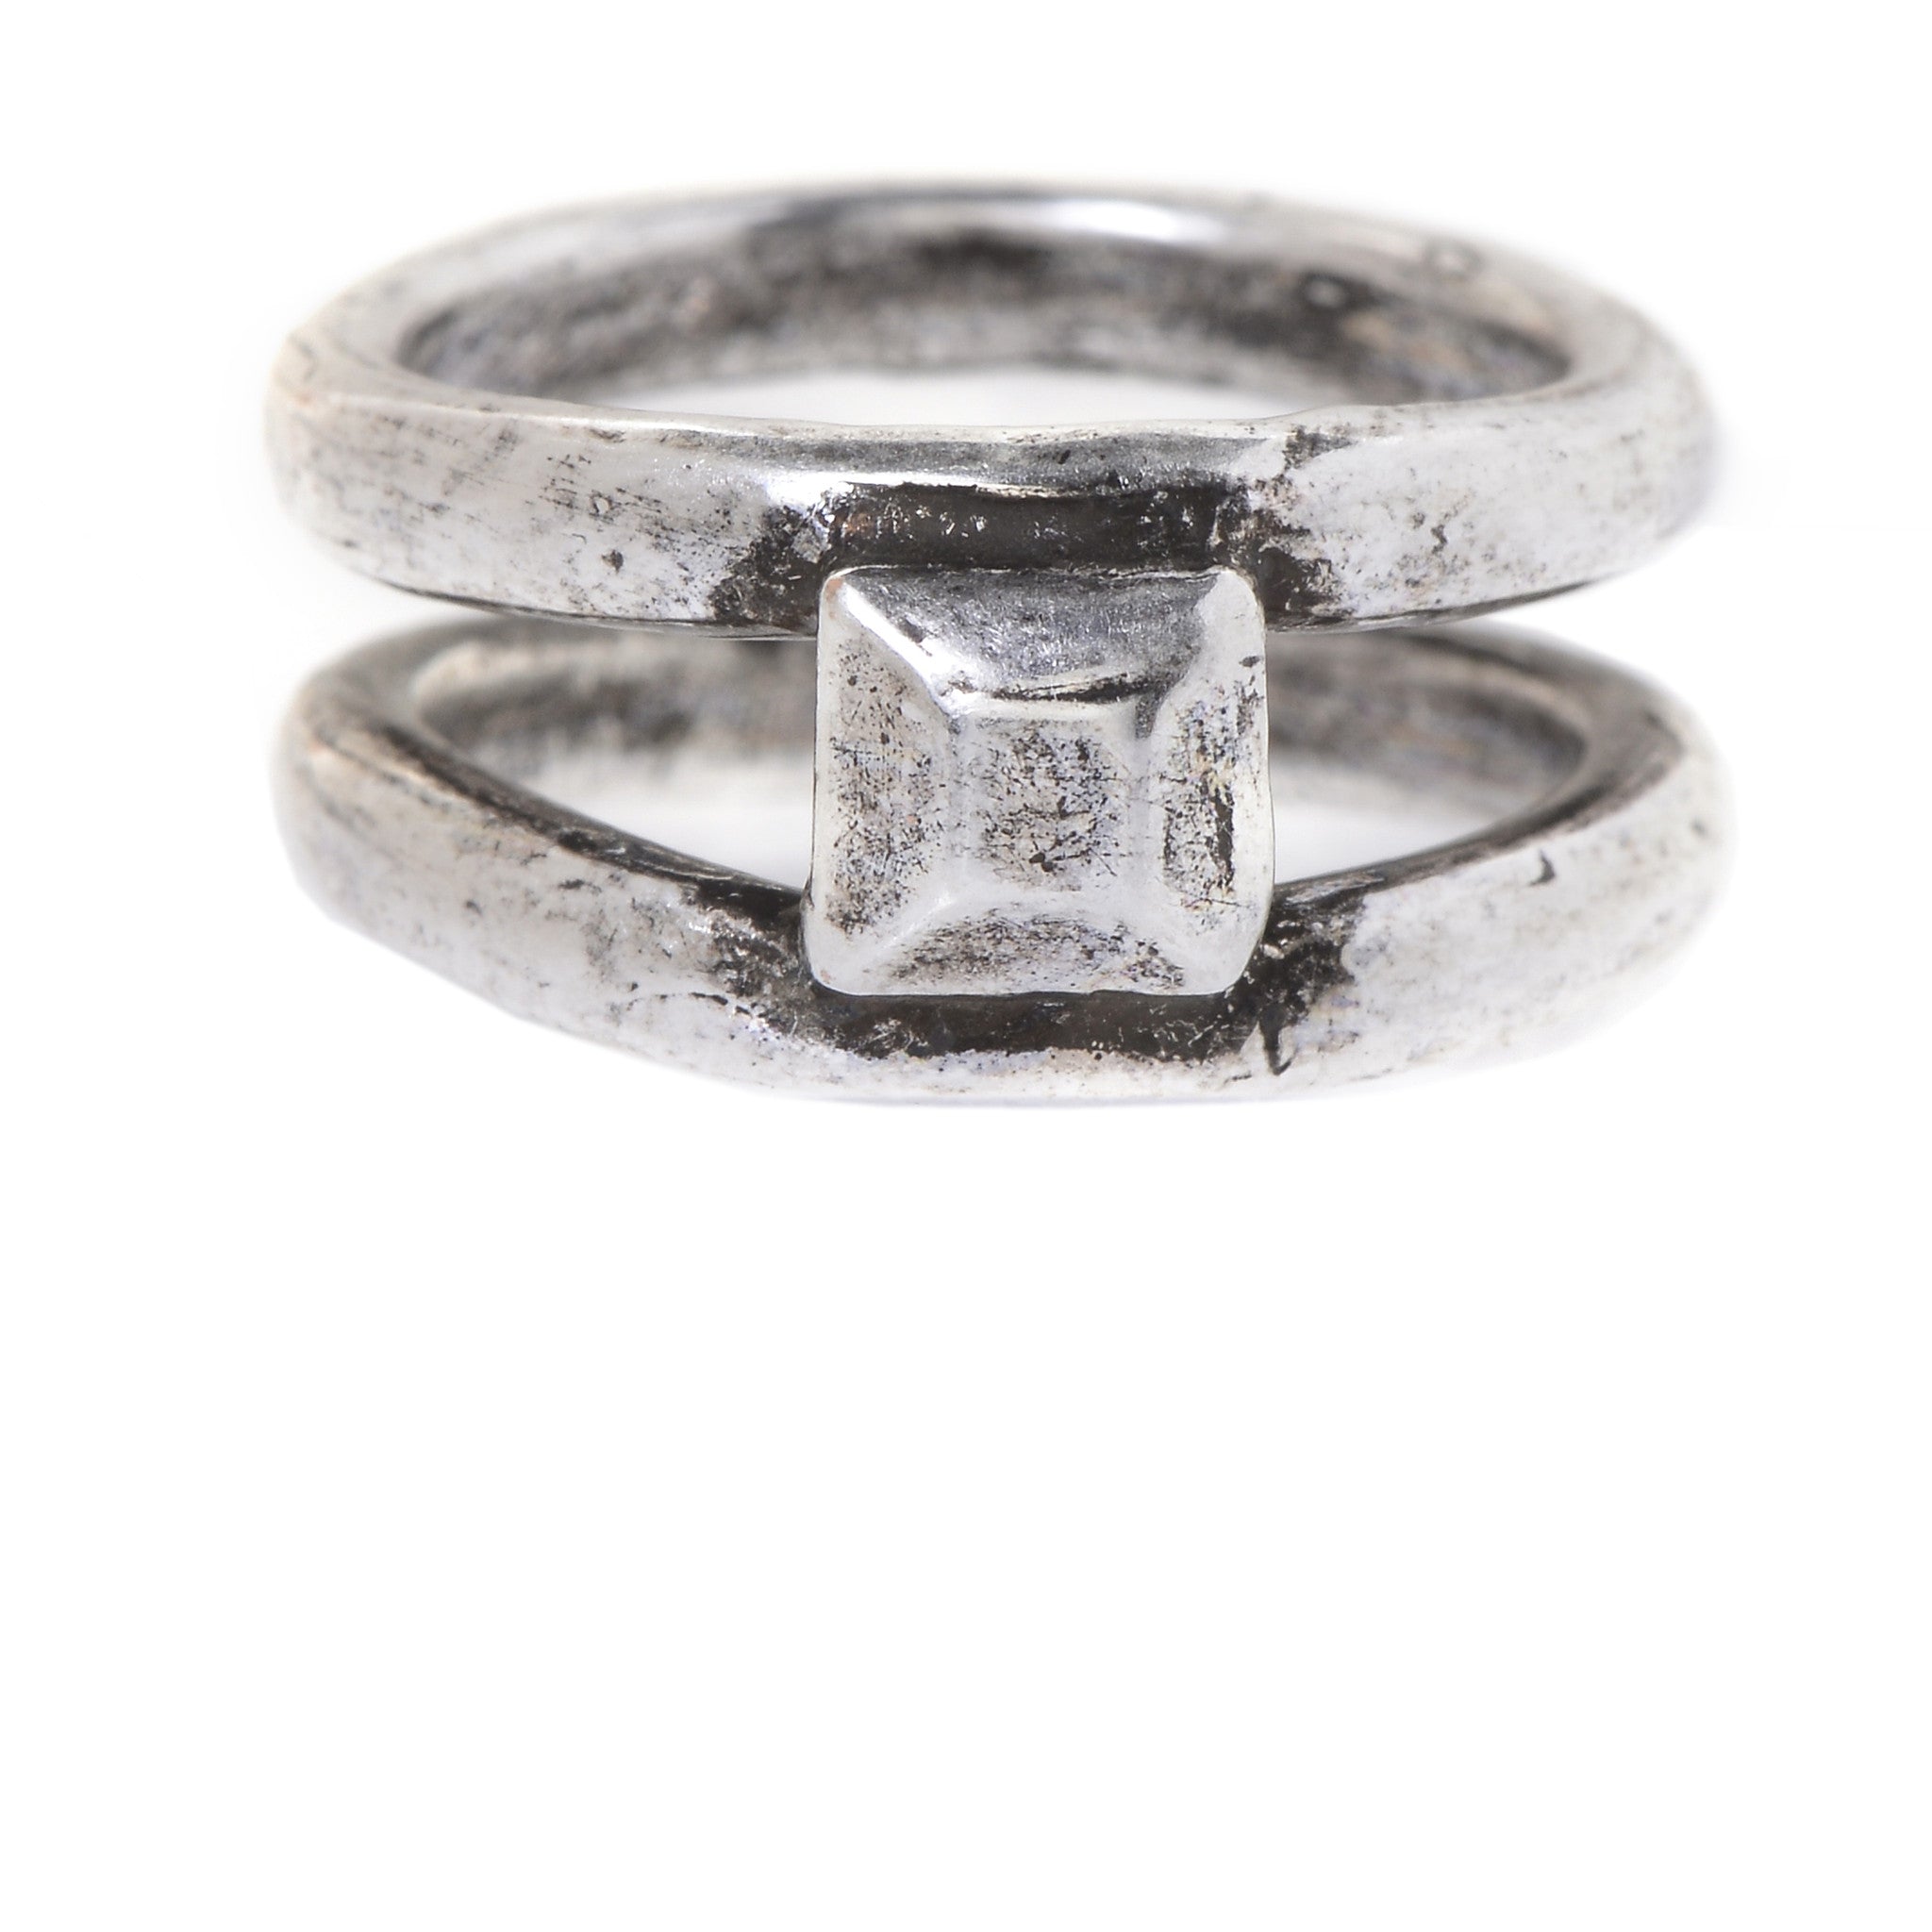 DOUBLE BAND PYRAMID RING